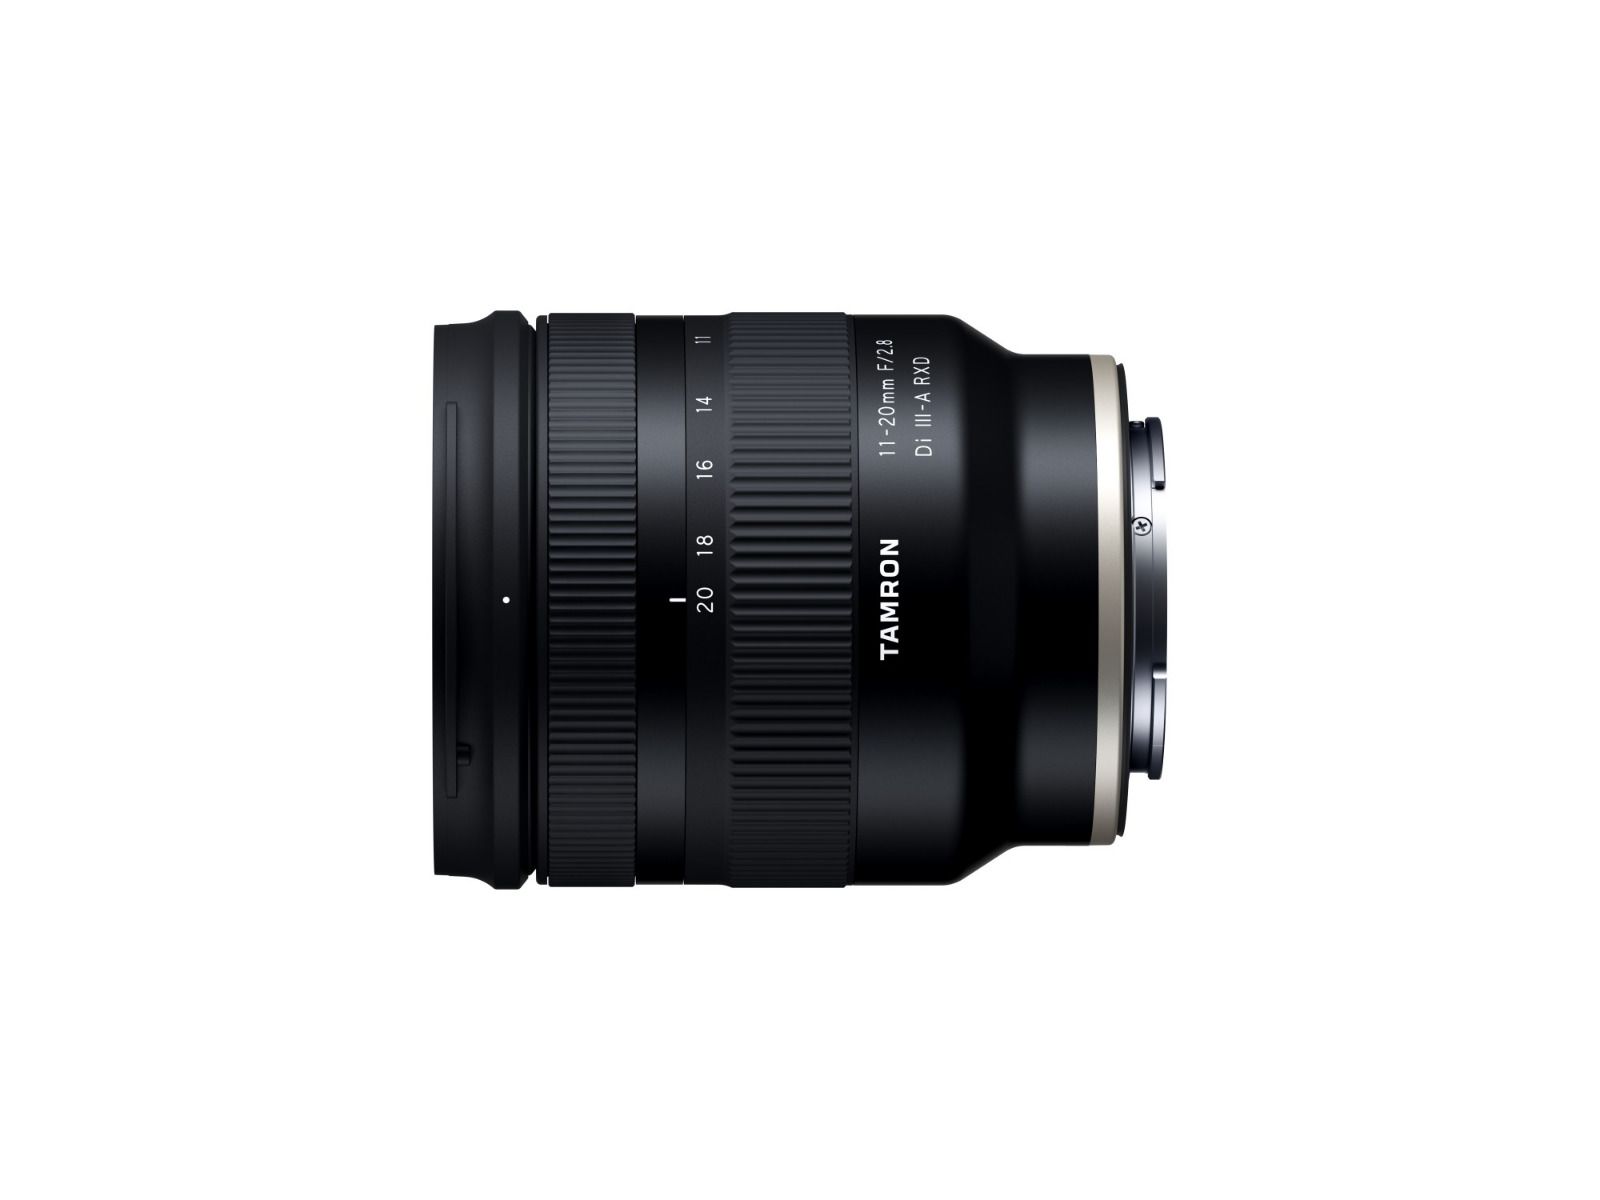 Tamron 11-20mm F2.8 Di III-A VC RXD Lens - Sony E Mount